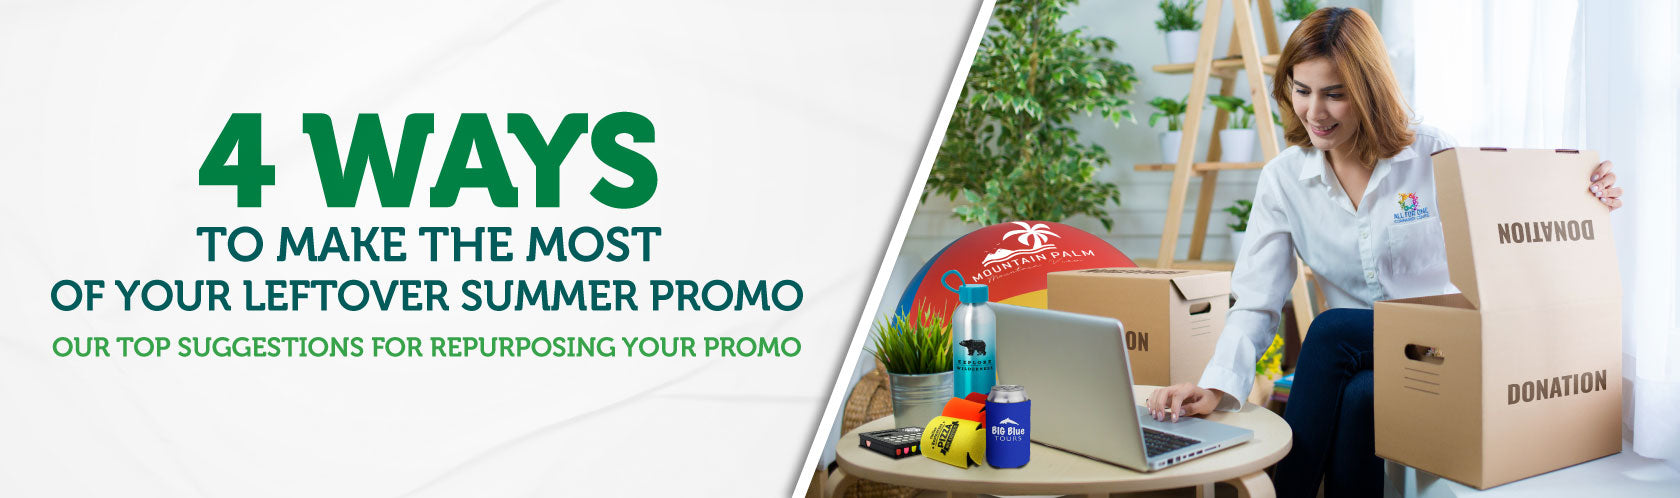 4 Ways to Make the Most of Your Leftover Summer Promo